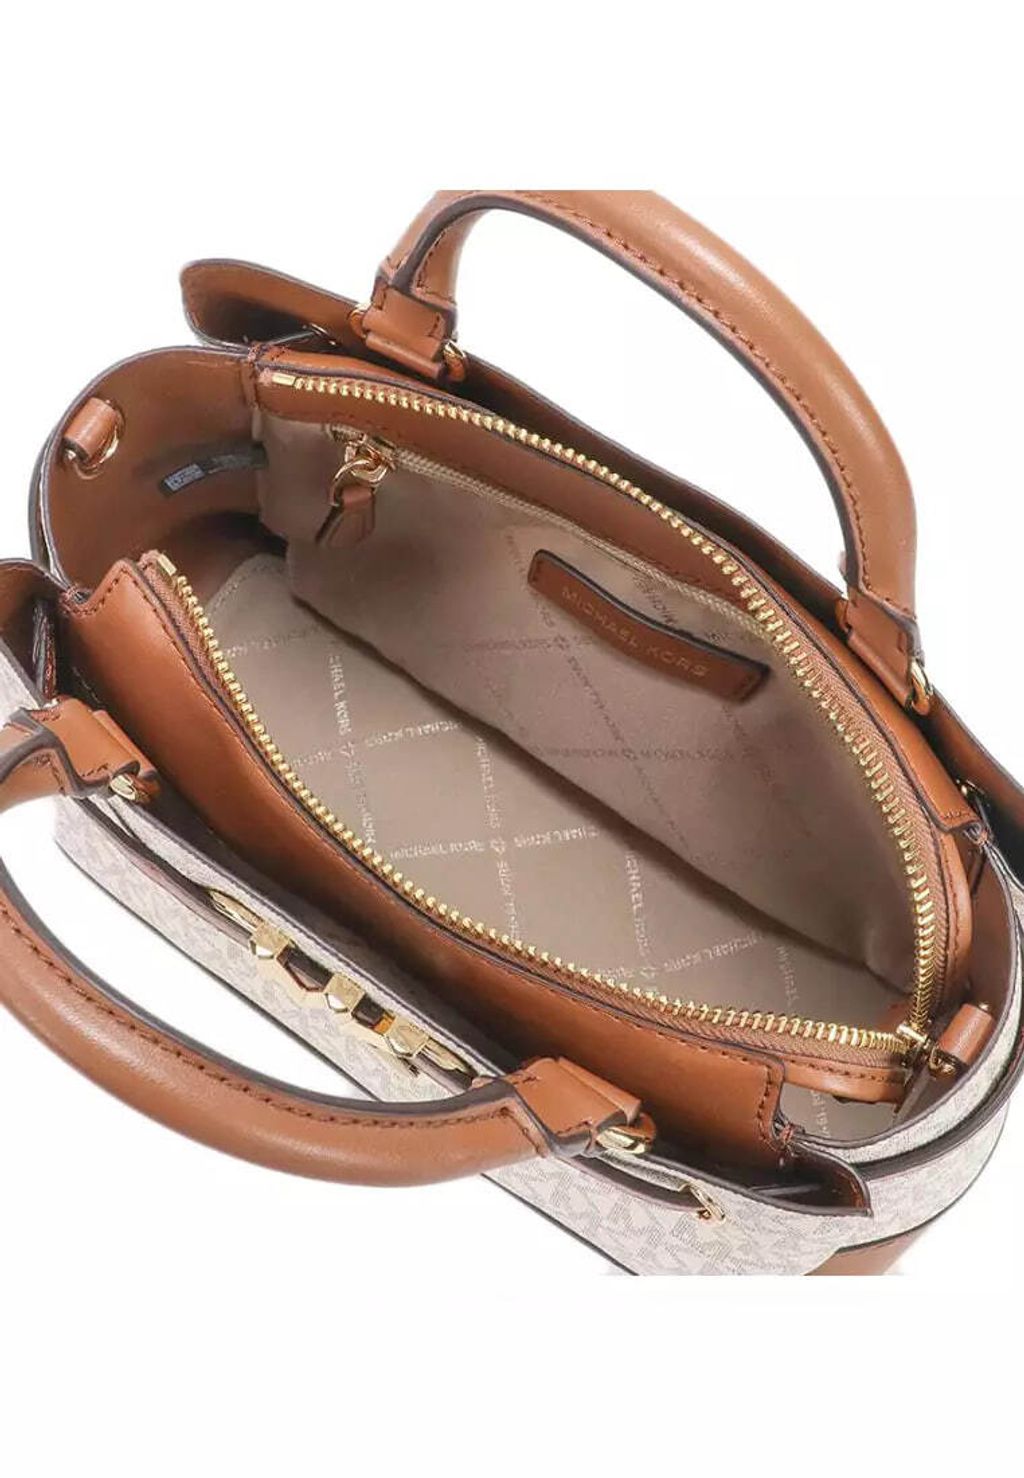 handbagbranded.com getlush outlet personalshopper usa malaysia ready stock coach malaysia Michael Kors Signature Reed Small Belted Satchel Leather in Vanilla 4